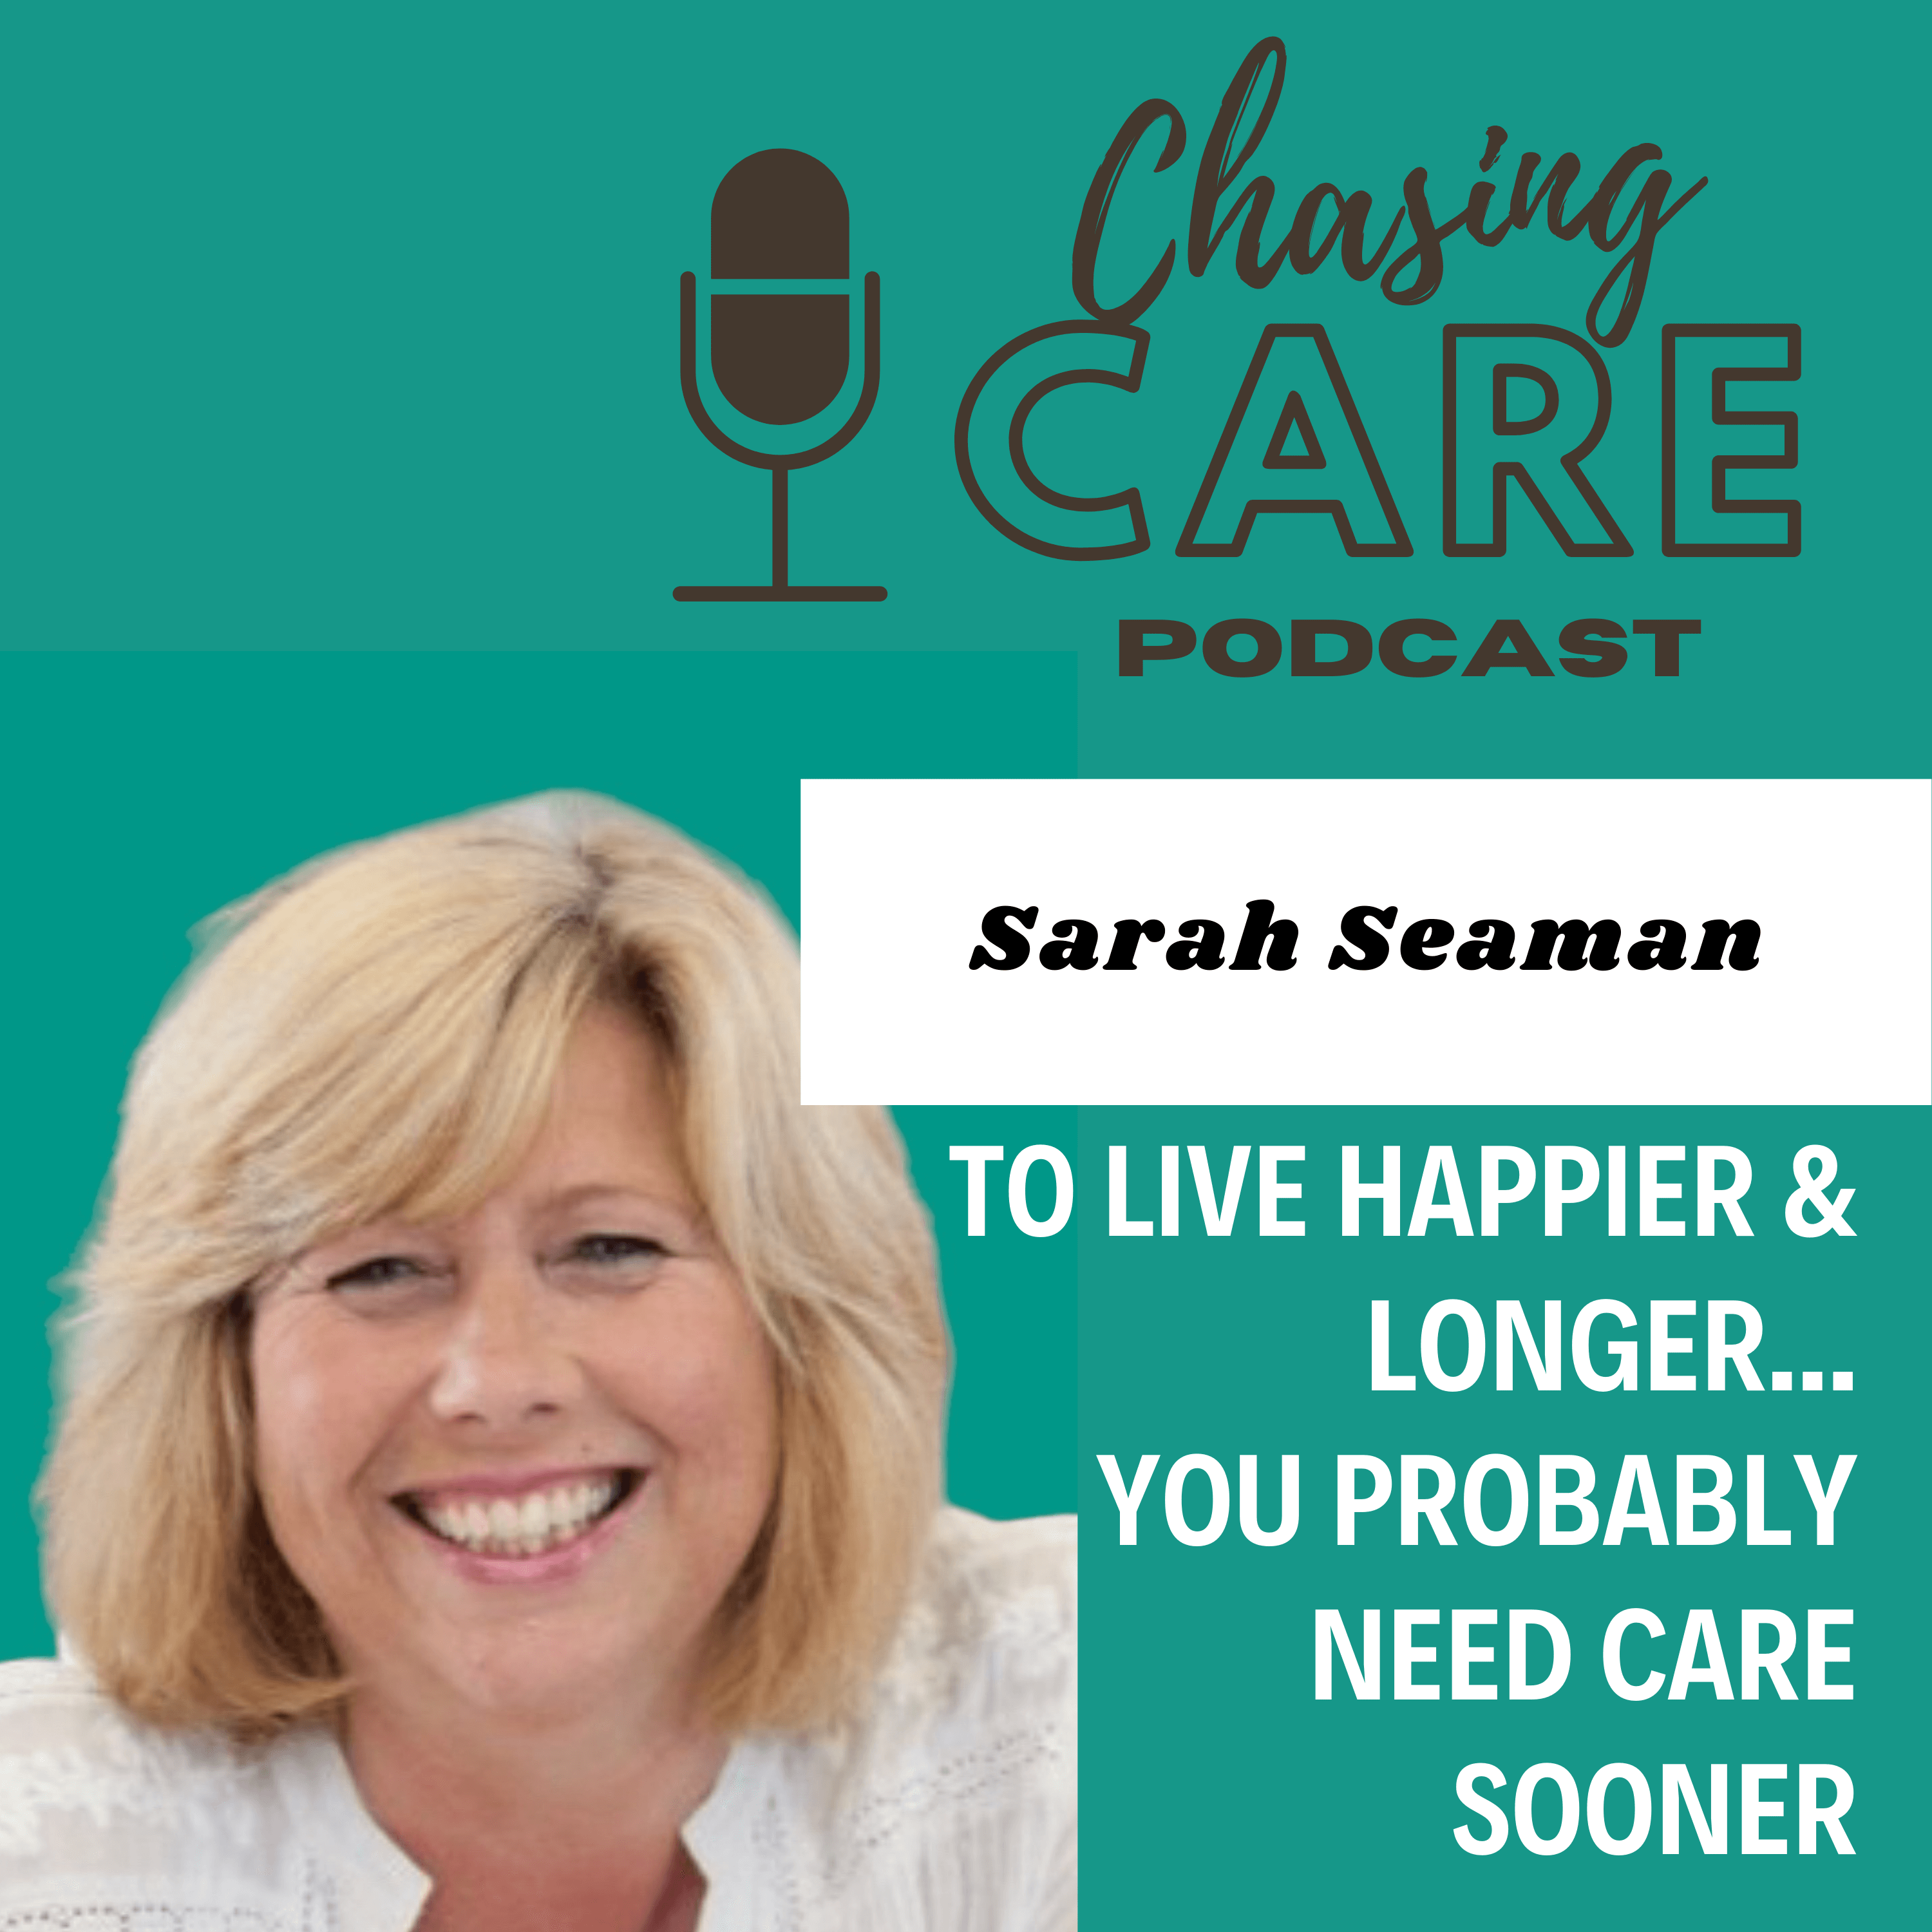 Chasing Care podcast with Sarah Seaman